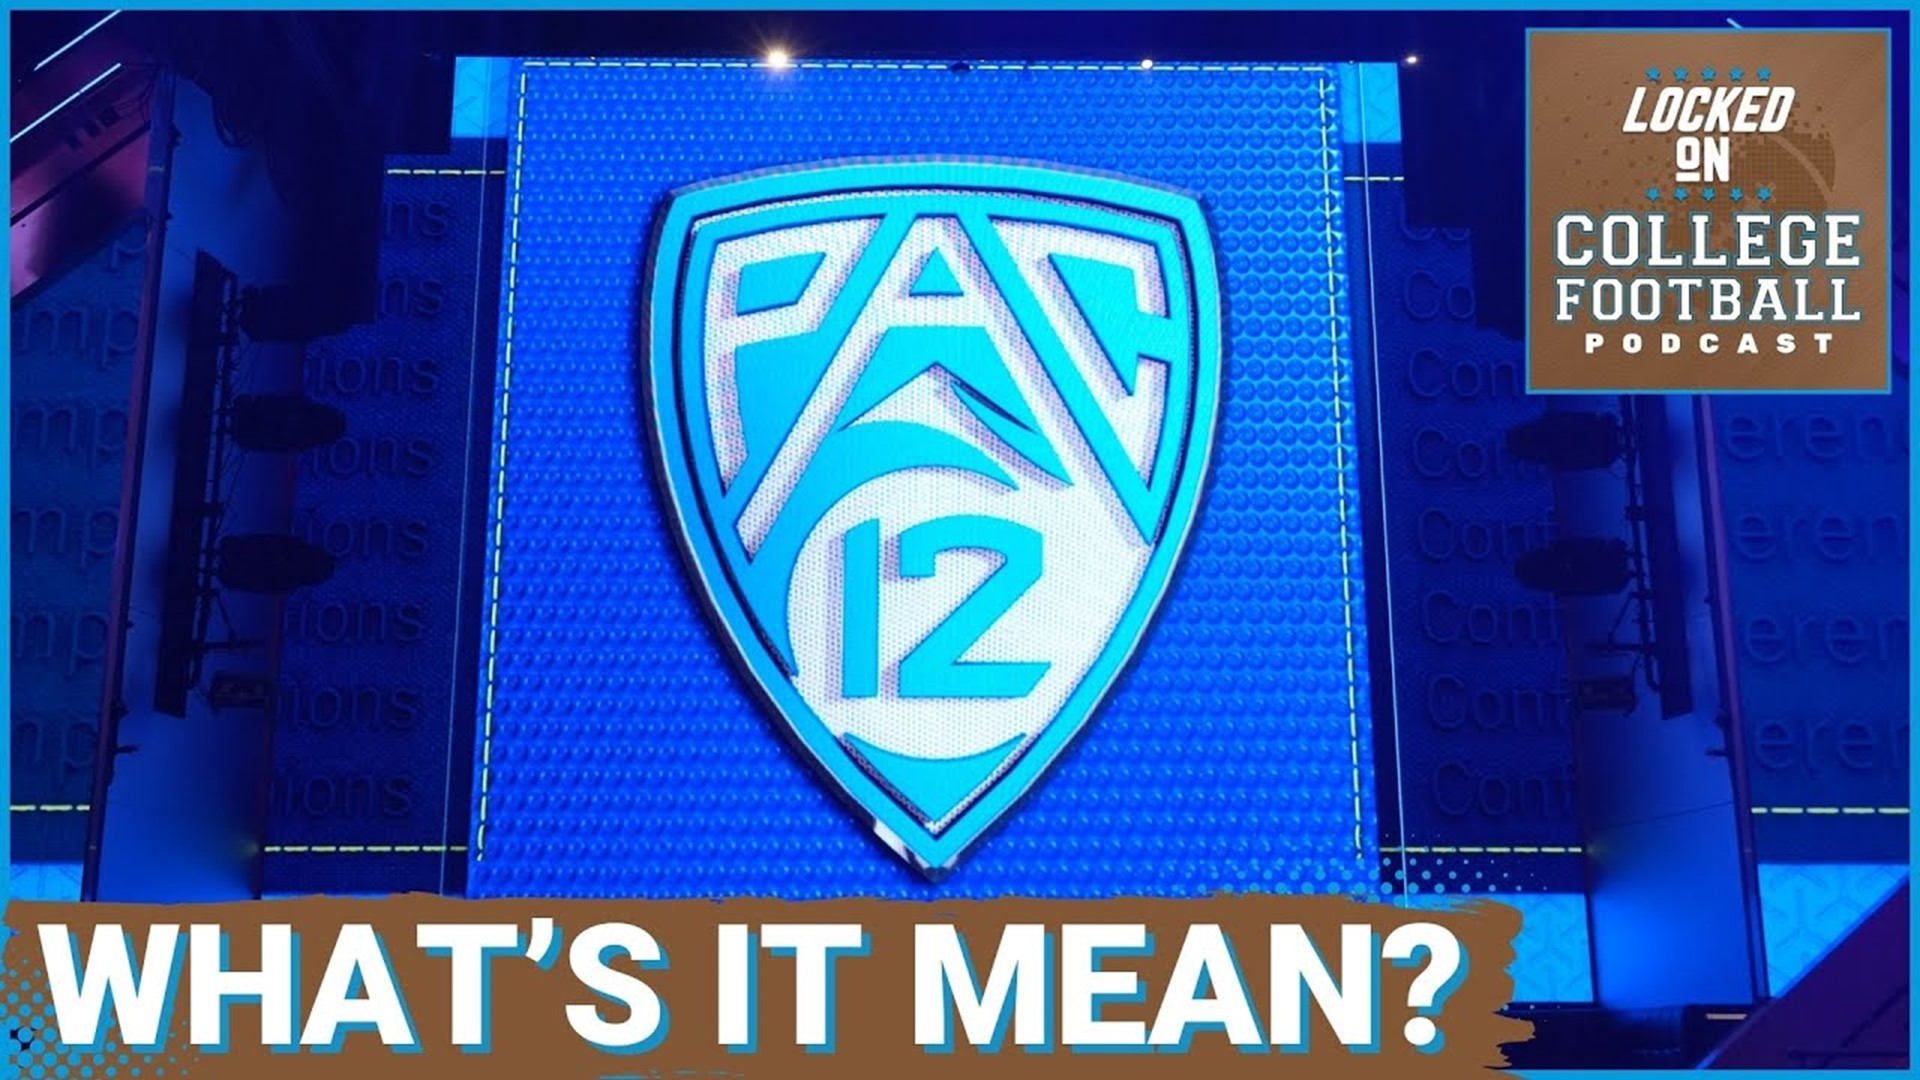 The Pac-12 was recently given the formal designation of no longer being an "Autonomous 5" league in college football. What does that actually mean?